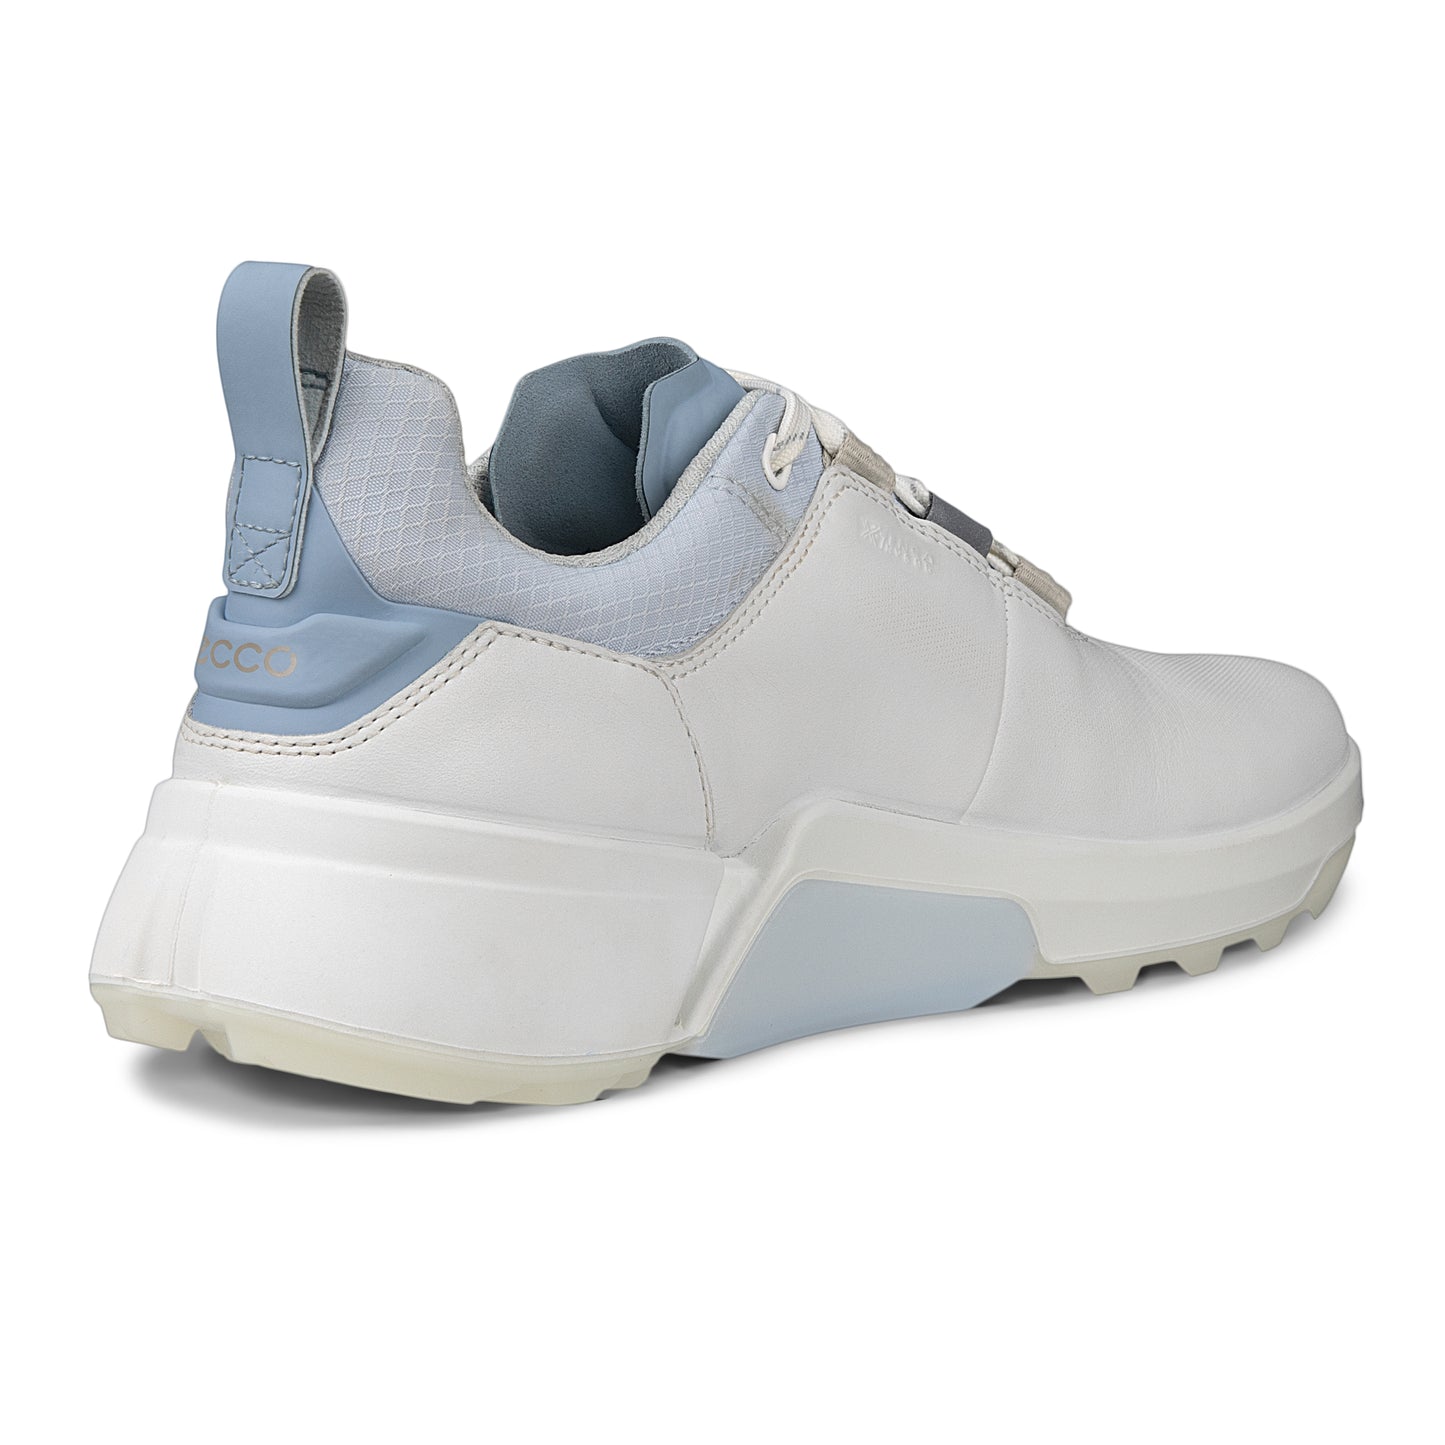 ECCO Ladies BIOM® H4 Golf Shoe with GORE-TEX in White